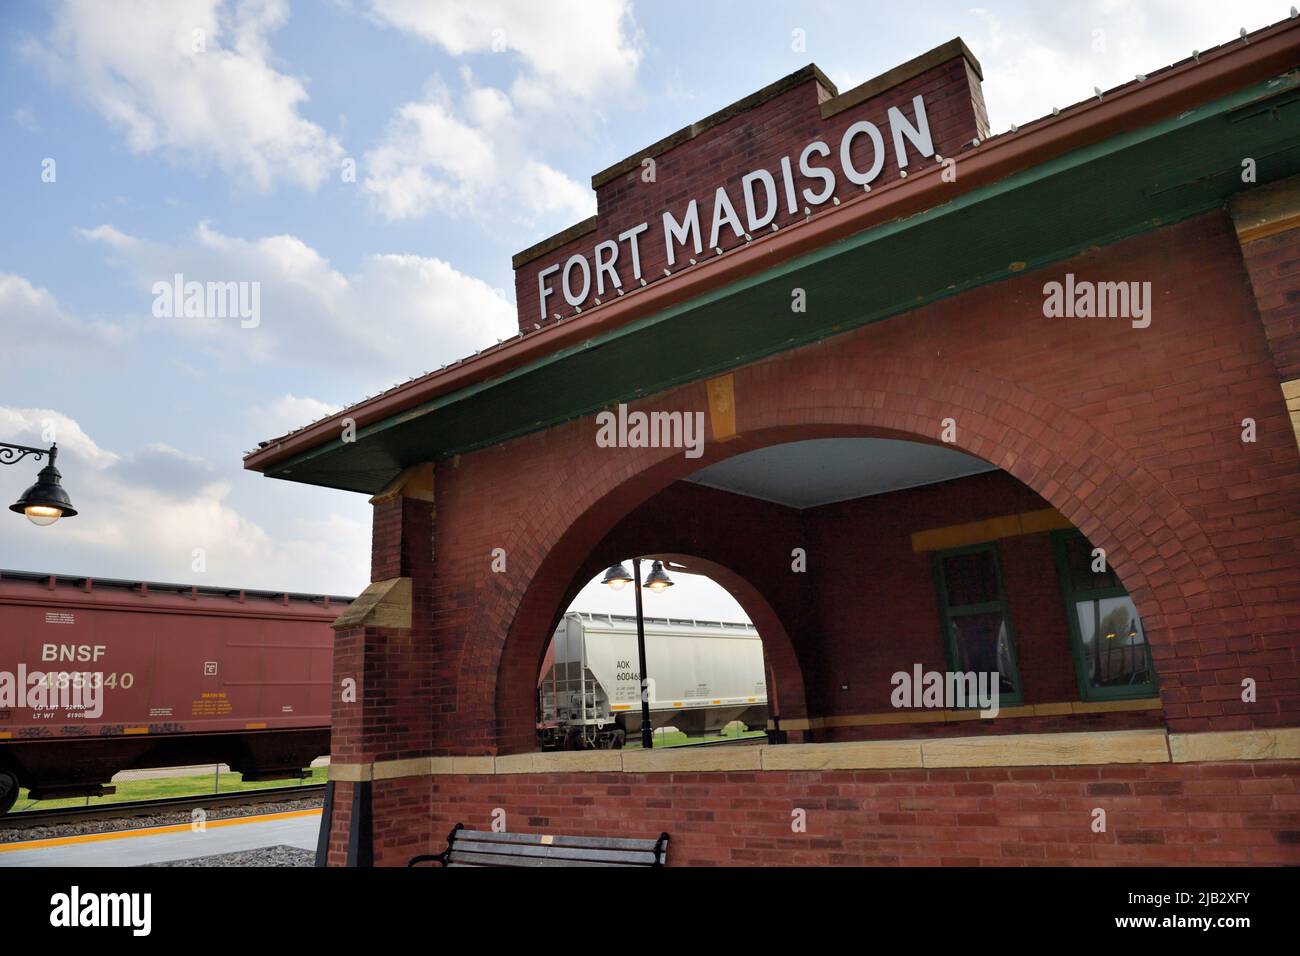 Fort Madison, Iowa, USA. A remnant of the past, the Atchinson, Topeka & Santa Fe Railway depot. Stock Photo